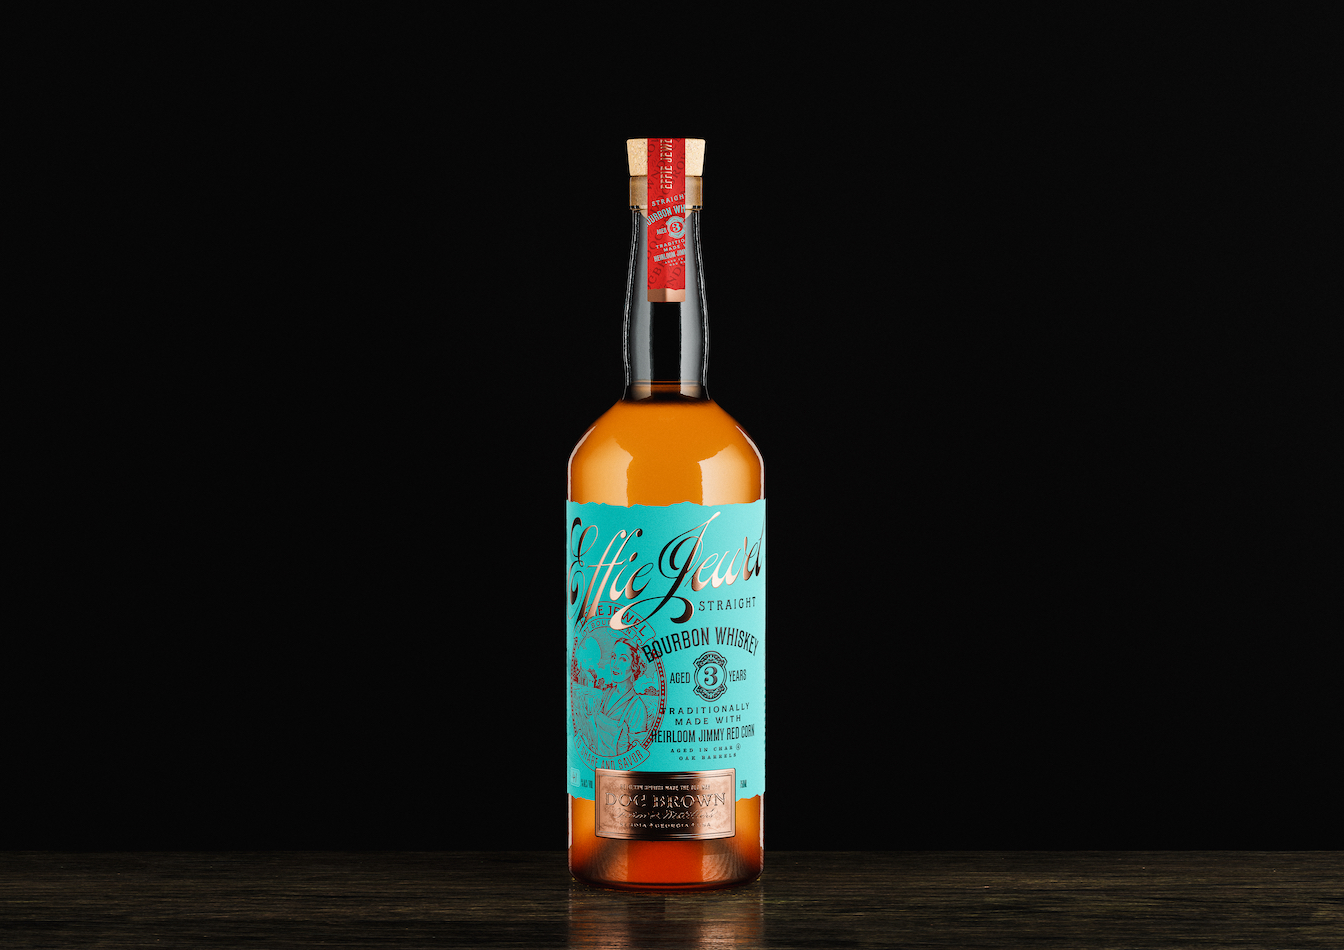 Effie Jewel Straight Bourbon Whiskey from Doc Brown Farm and distillers, bottle image